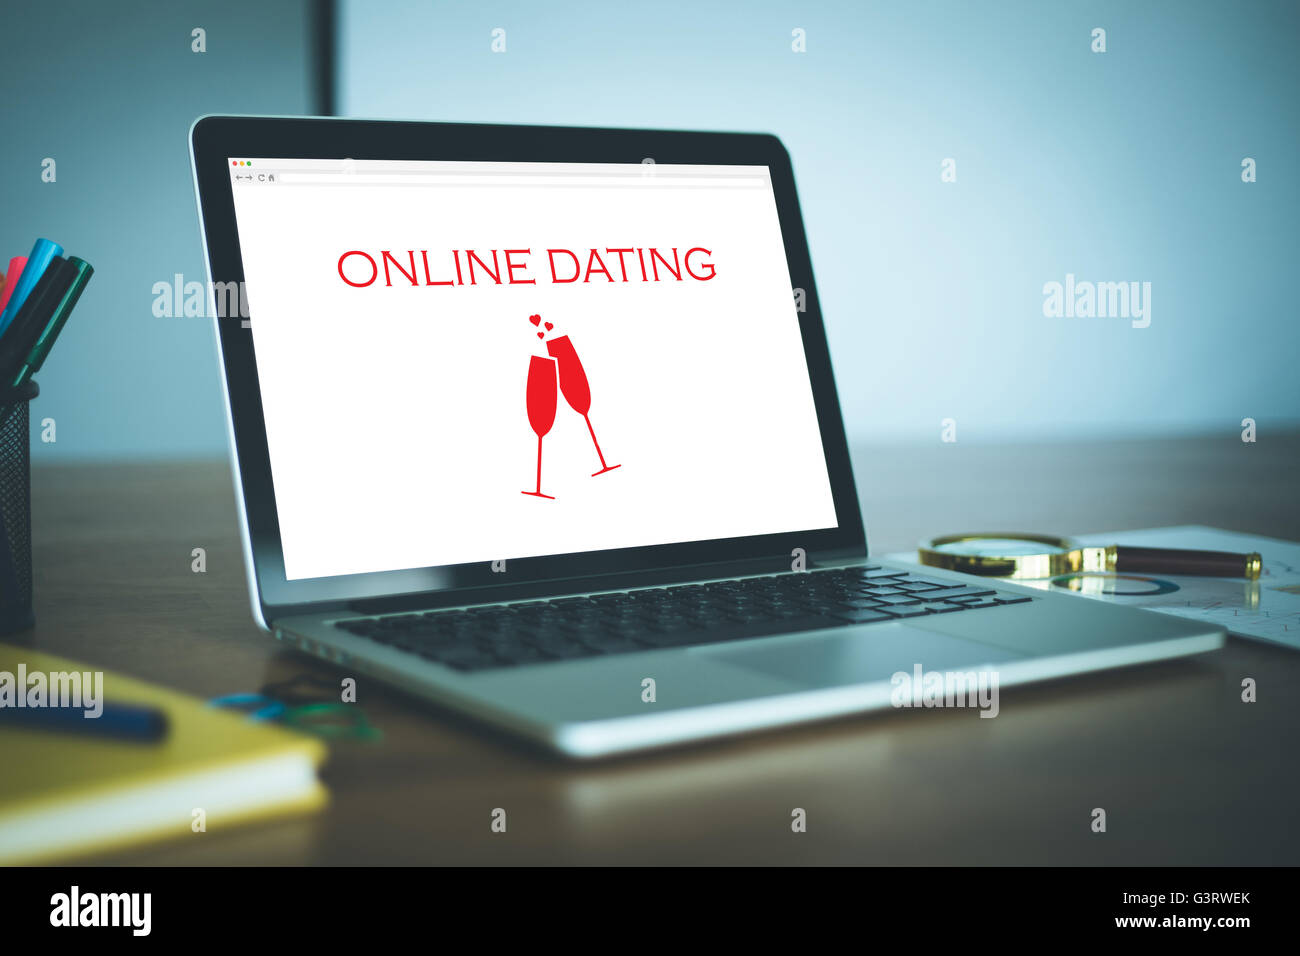 Online dating website on a laptop display Stock Photo